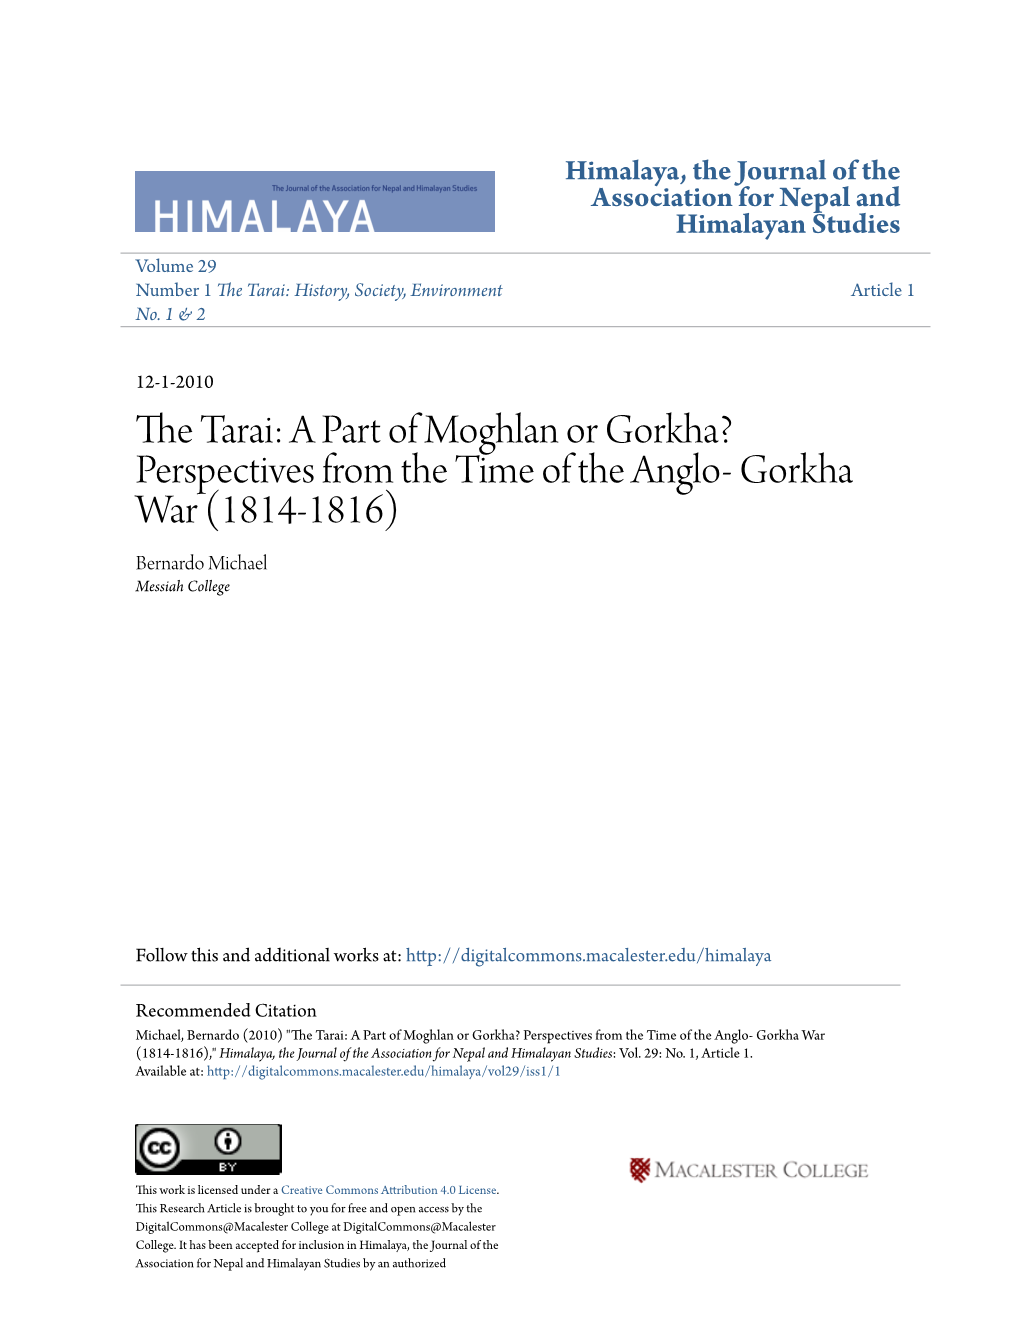 Gorkha? Perspectives from the Time of the Anglo- Gorkha War (1814-1816) Bernardo Michael Messiah College